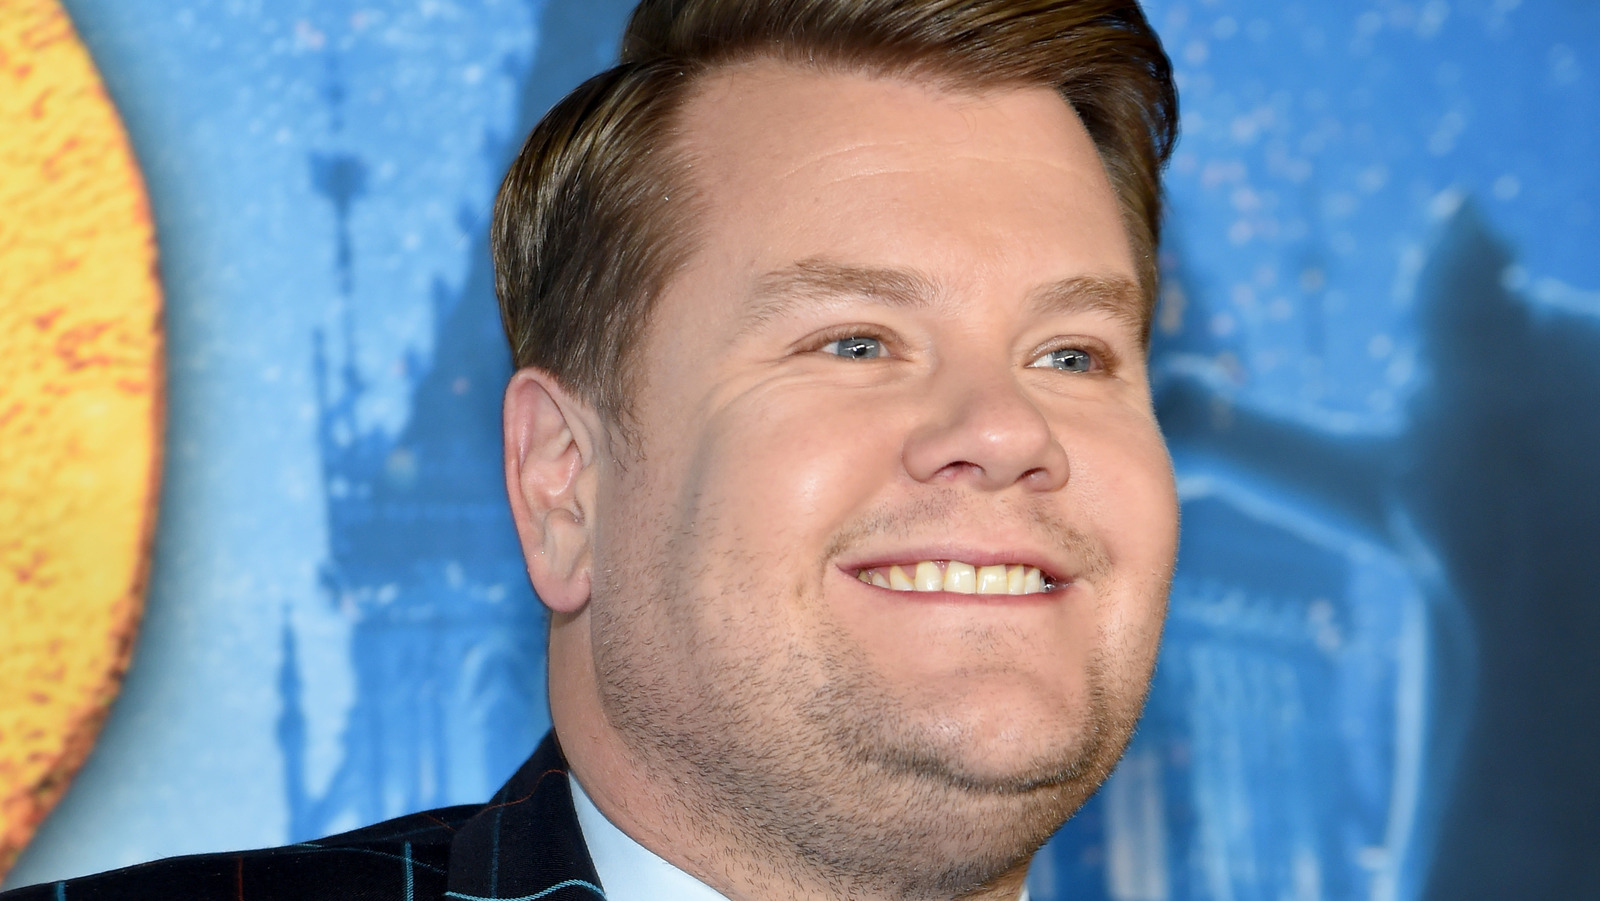 The Real Reason James Corden Just Partnered With Ww 